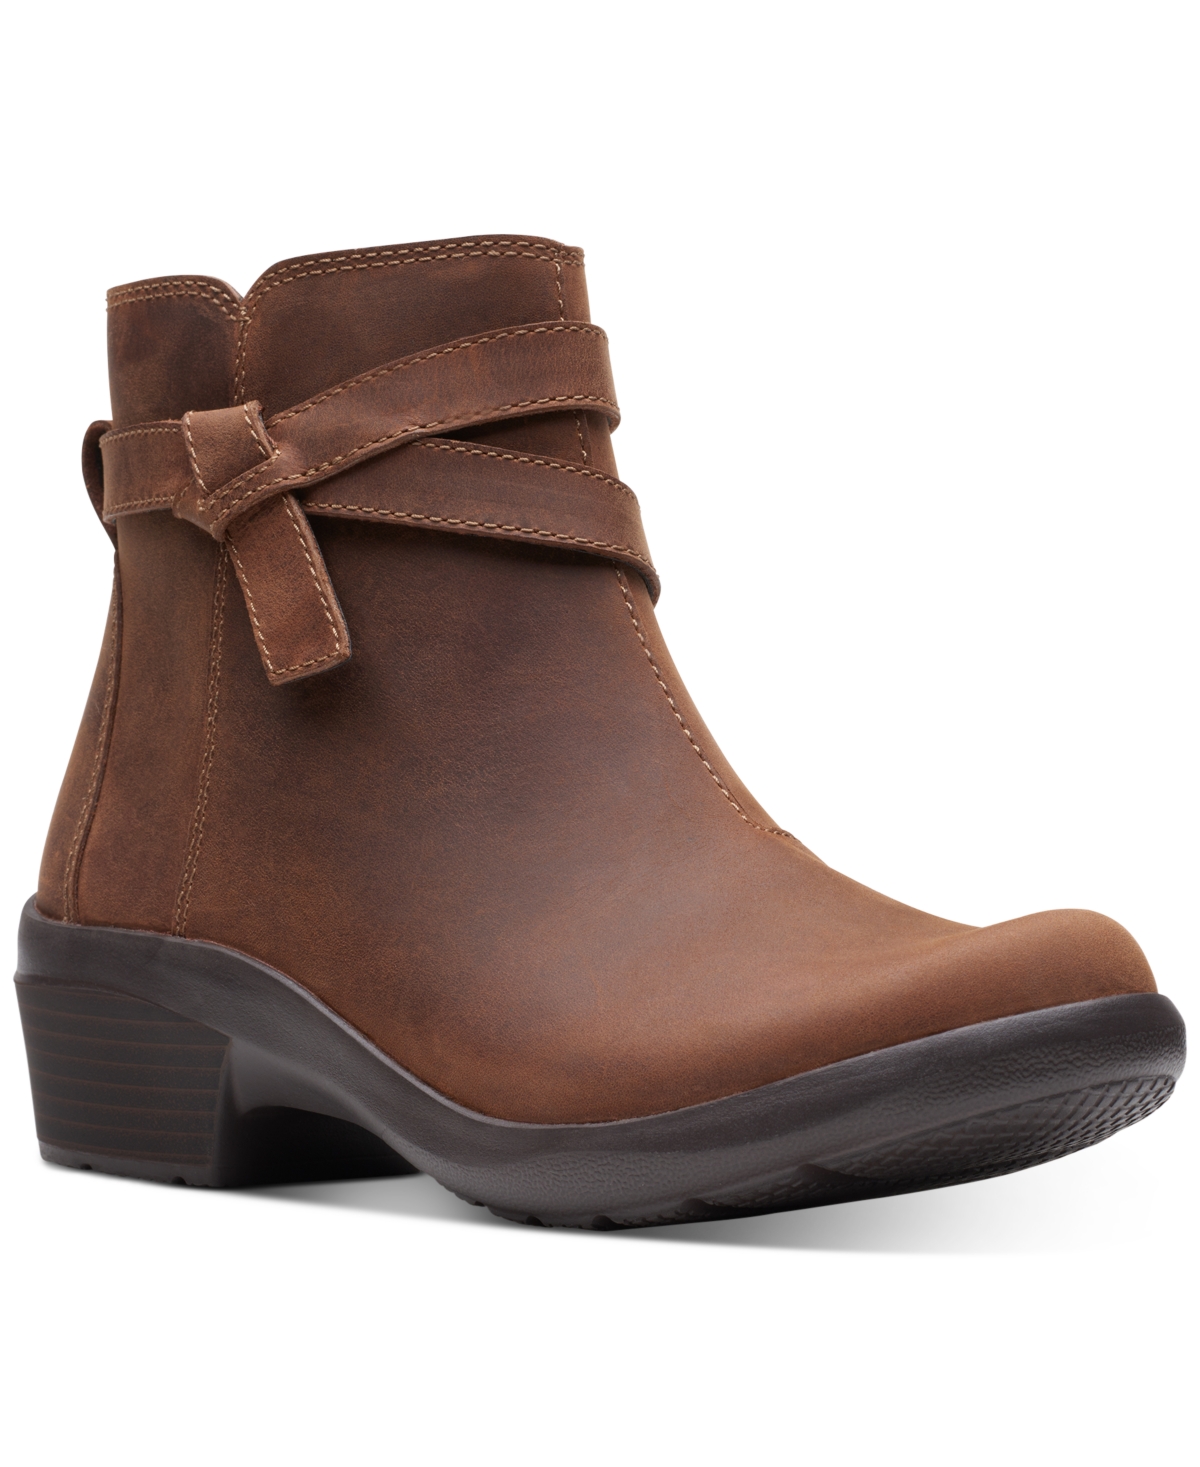 CLARKS WOMEN'S ANGIE SPICE BOOTIES